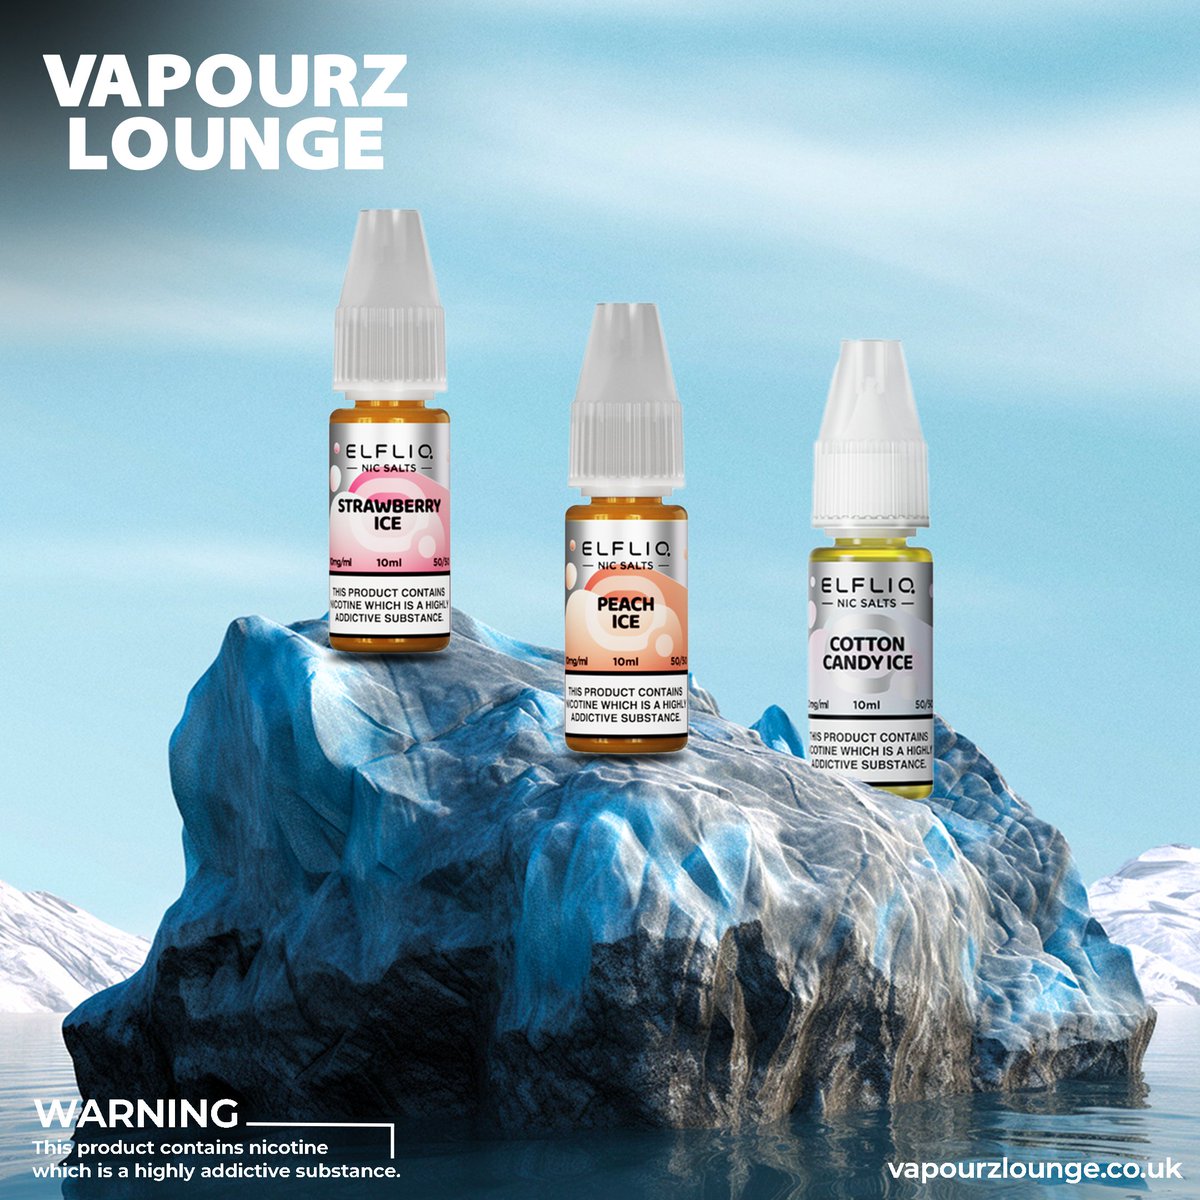 Explore a variety of Nic Salts e-liquids by ELFLIQ at Vapourz Lounge

Buy 6 for £20

Shop Now:vapourzlounge.co.uk/product-catego…

#VapeTherapy #RelaxationStation #battersea #brixton #tooting #claphamjunction #vape #vapelife #vapeporn #vapenation #vapefam #vapeon #vapecommunity #terea #iqos